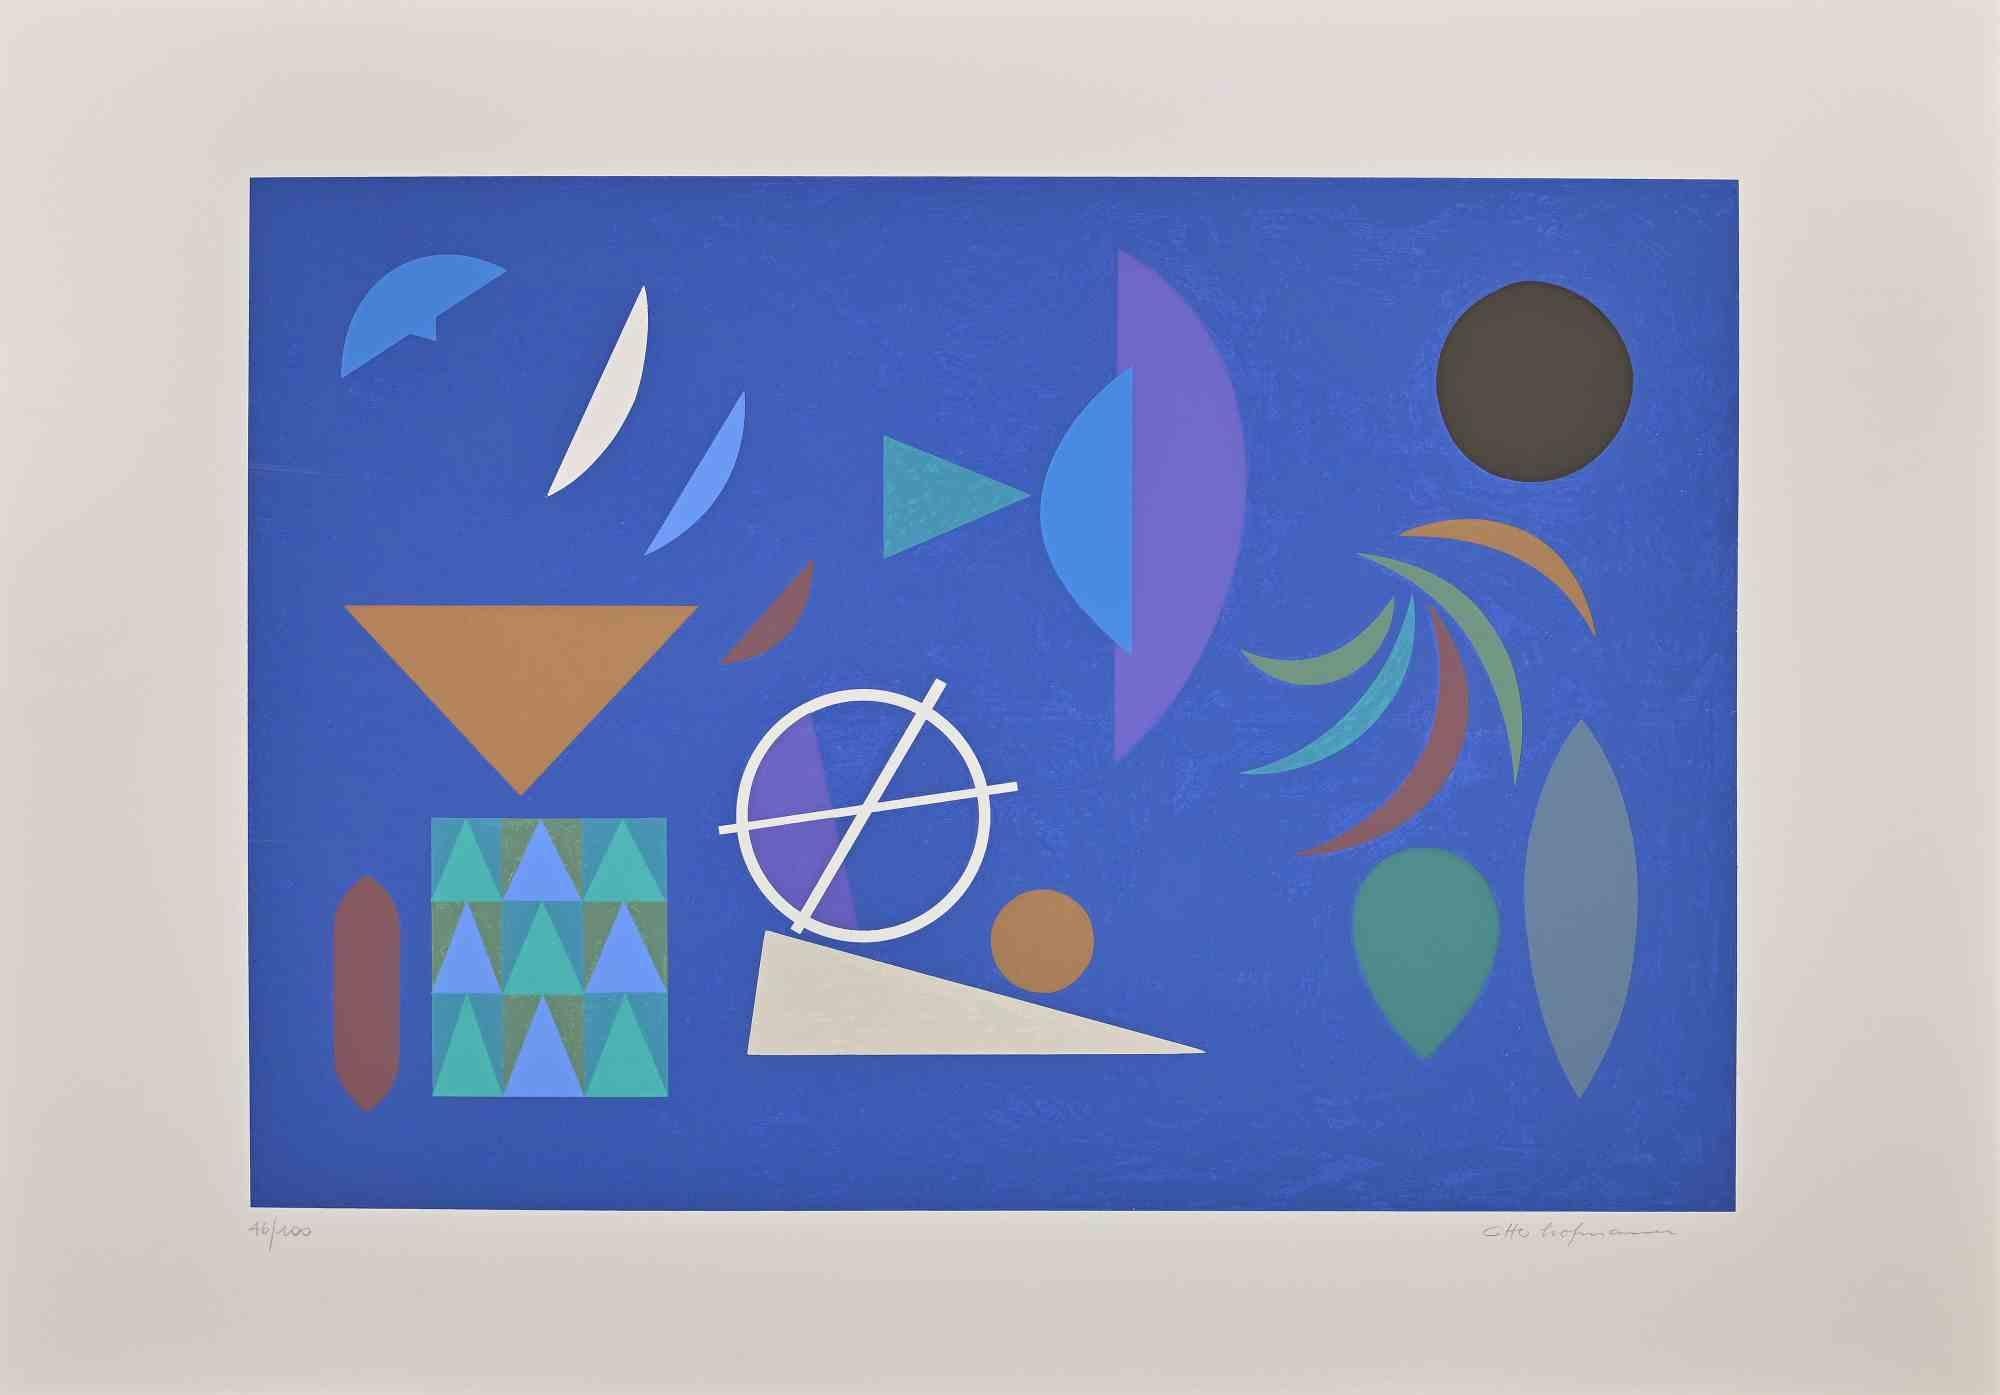 Blue composition is an original contemporary artwork realizedby Otto Hofmann in 1989.

Mixed colored screen print.

Hand signed on the lower right margin.

Numbered on the lower left. Edition of 46/100.

The artwork is from a potfolio edited by